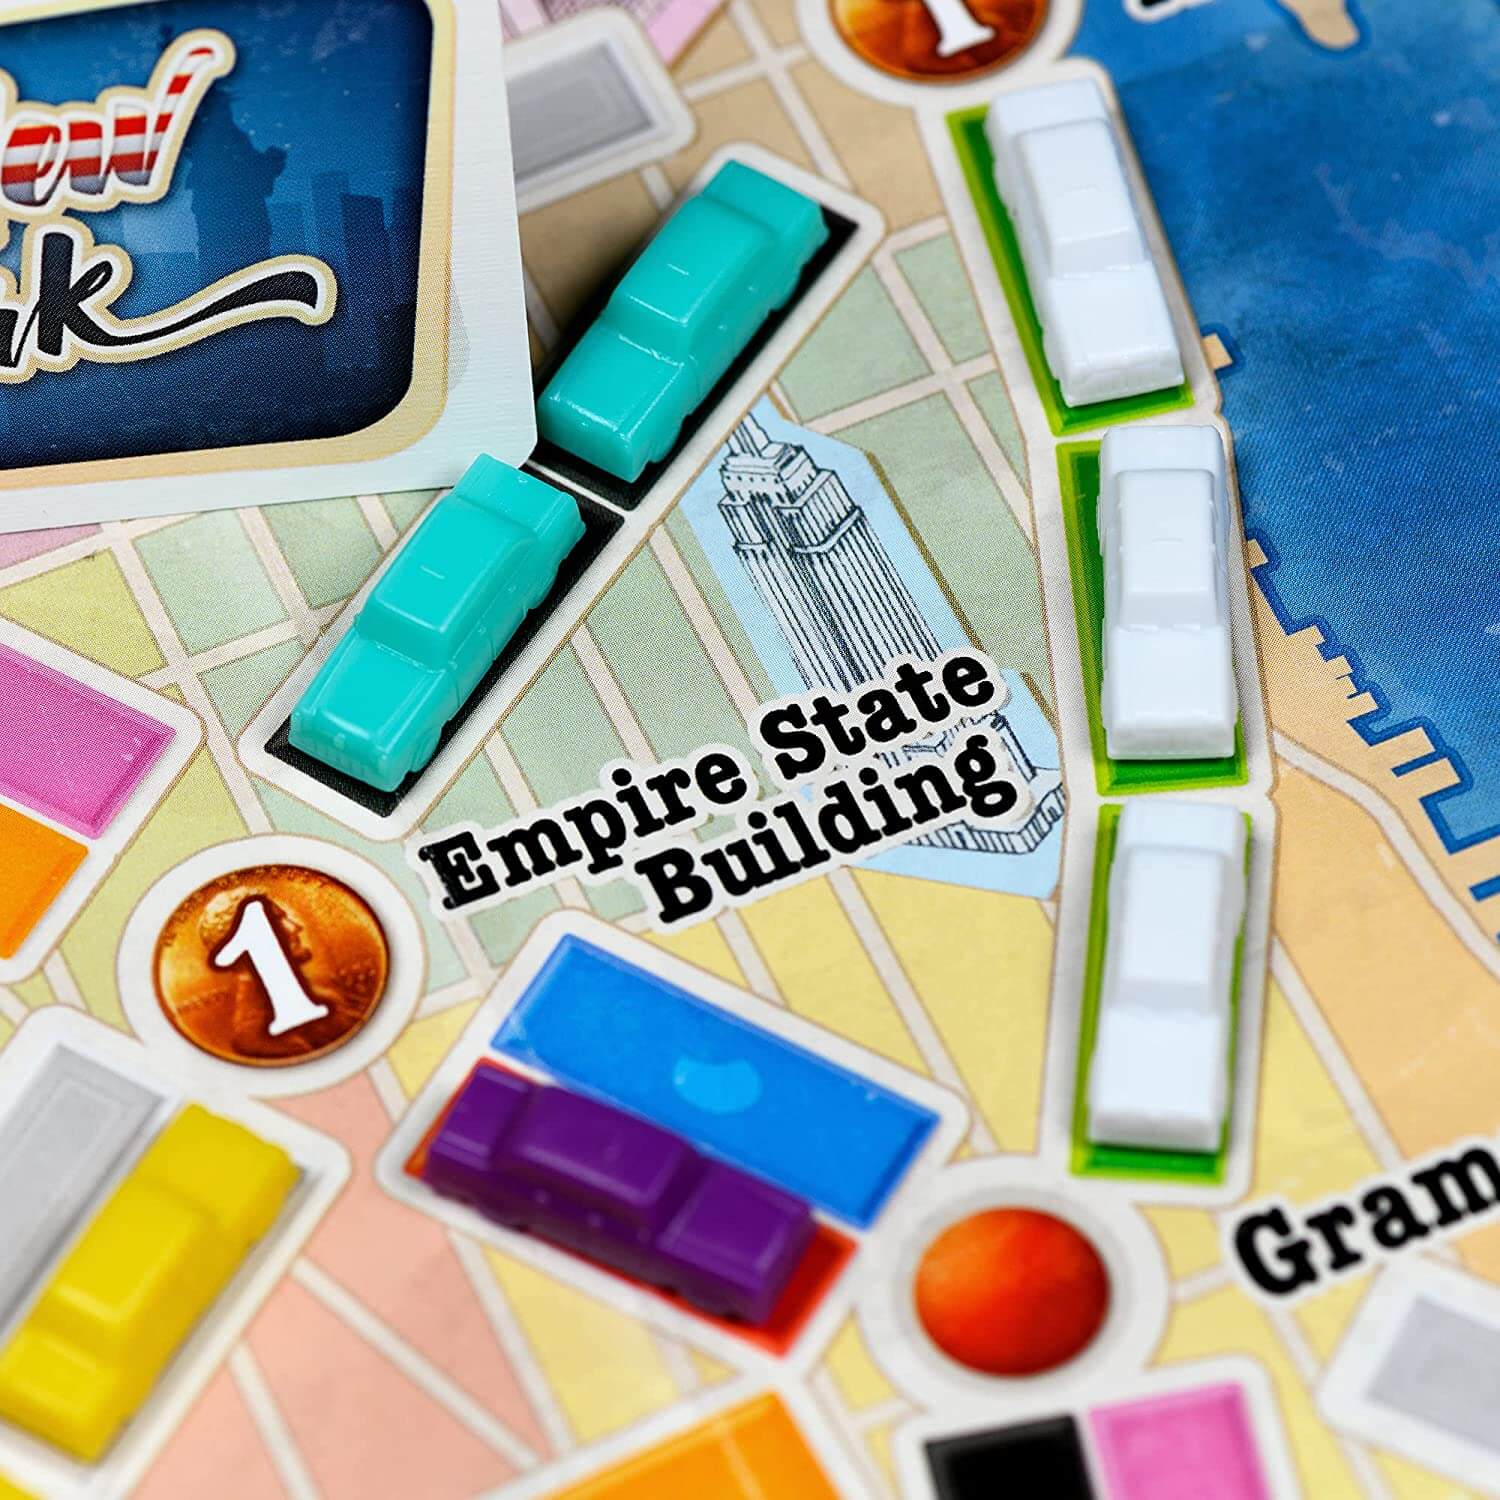 Ticket to Ride New York Game